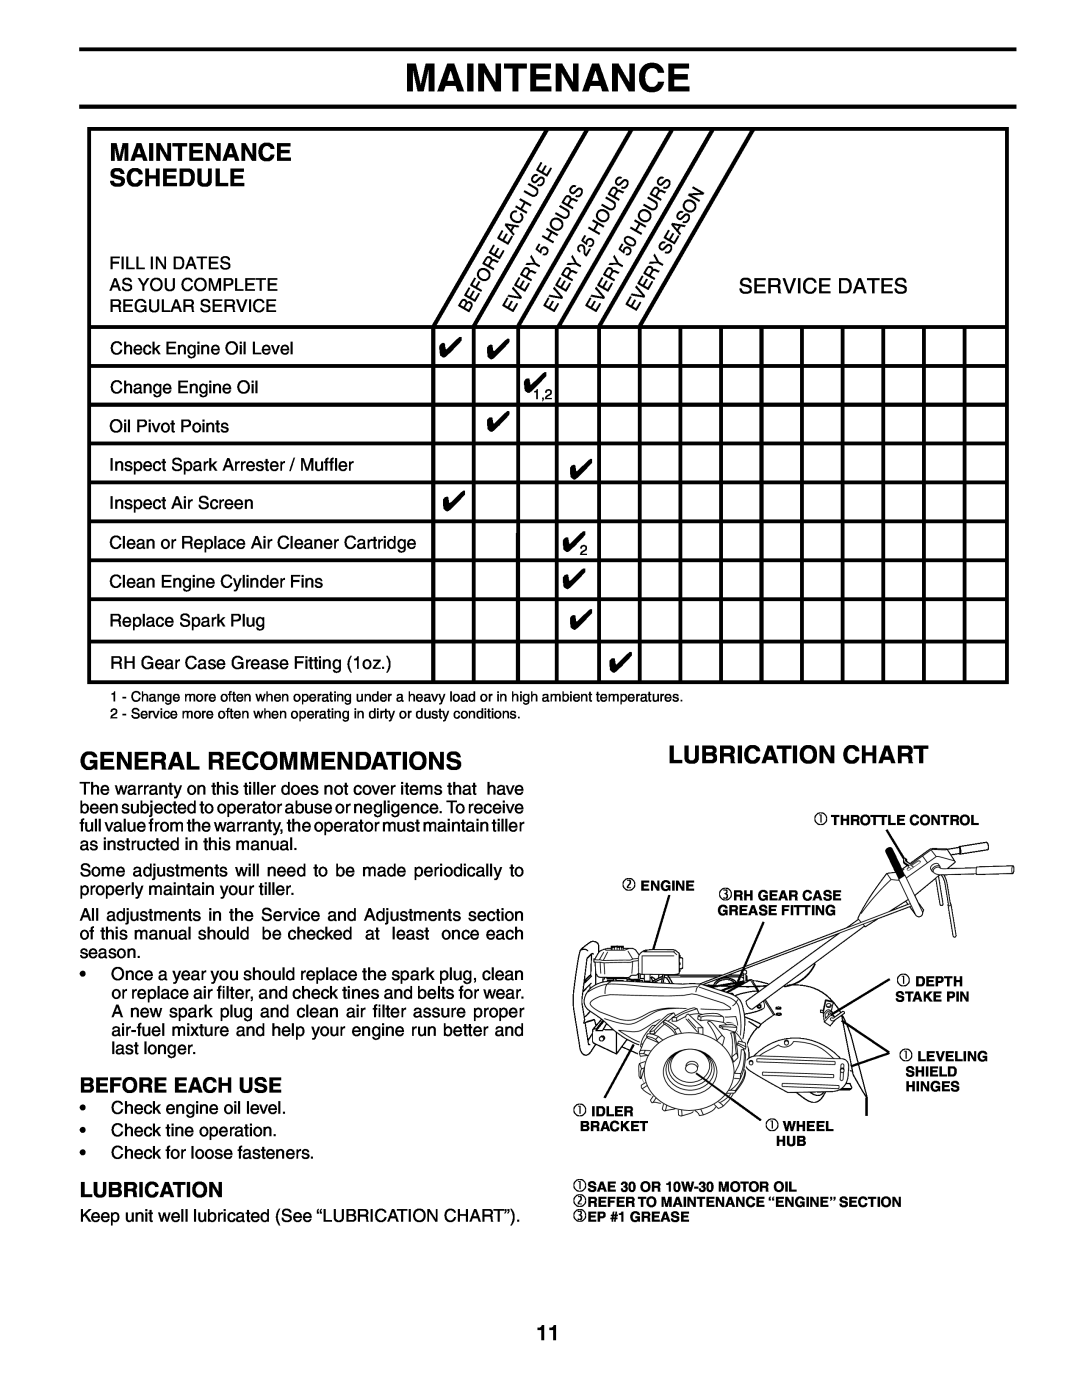 Poulan PRRT65D Maintenance Schedule, General Recommendations, Lubrication Chart, Before Each Use, Service Dates 